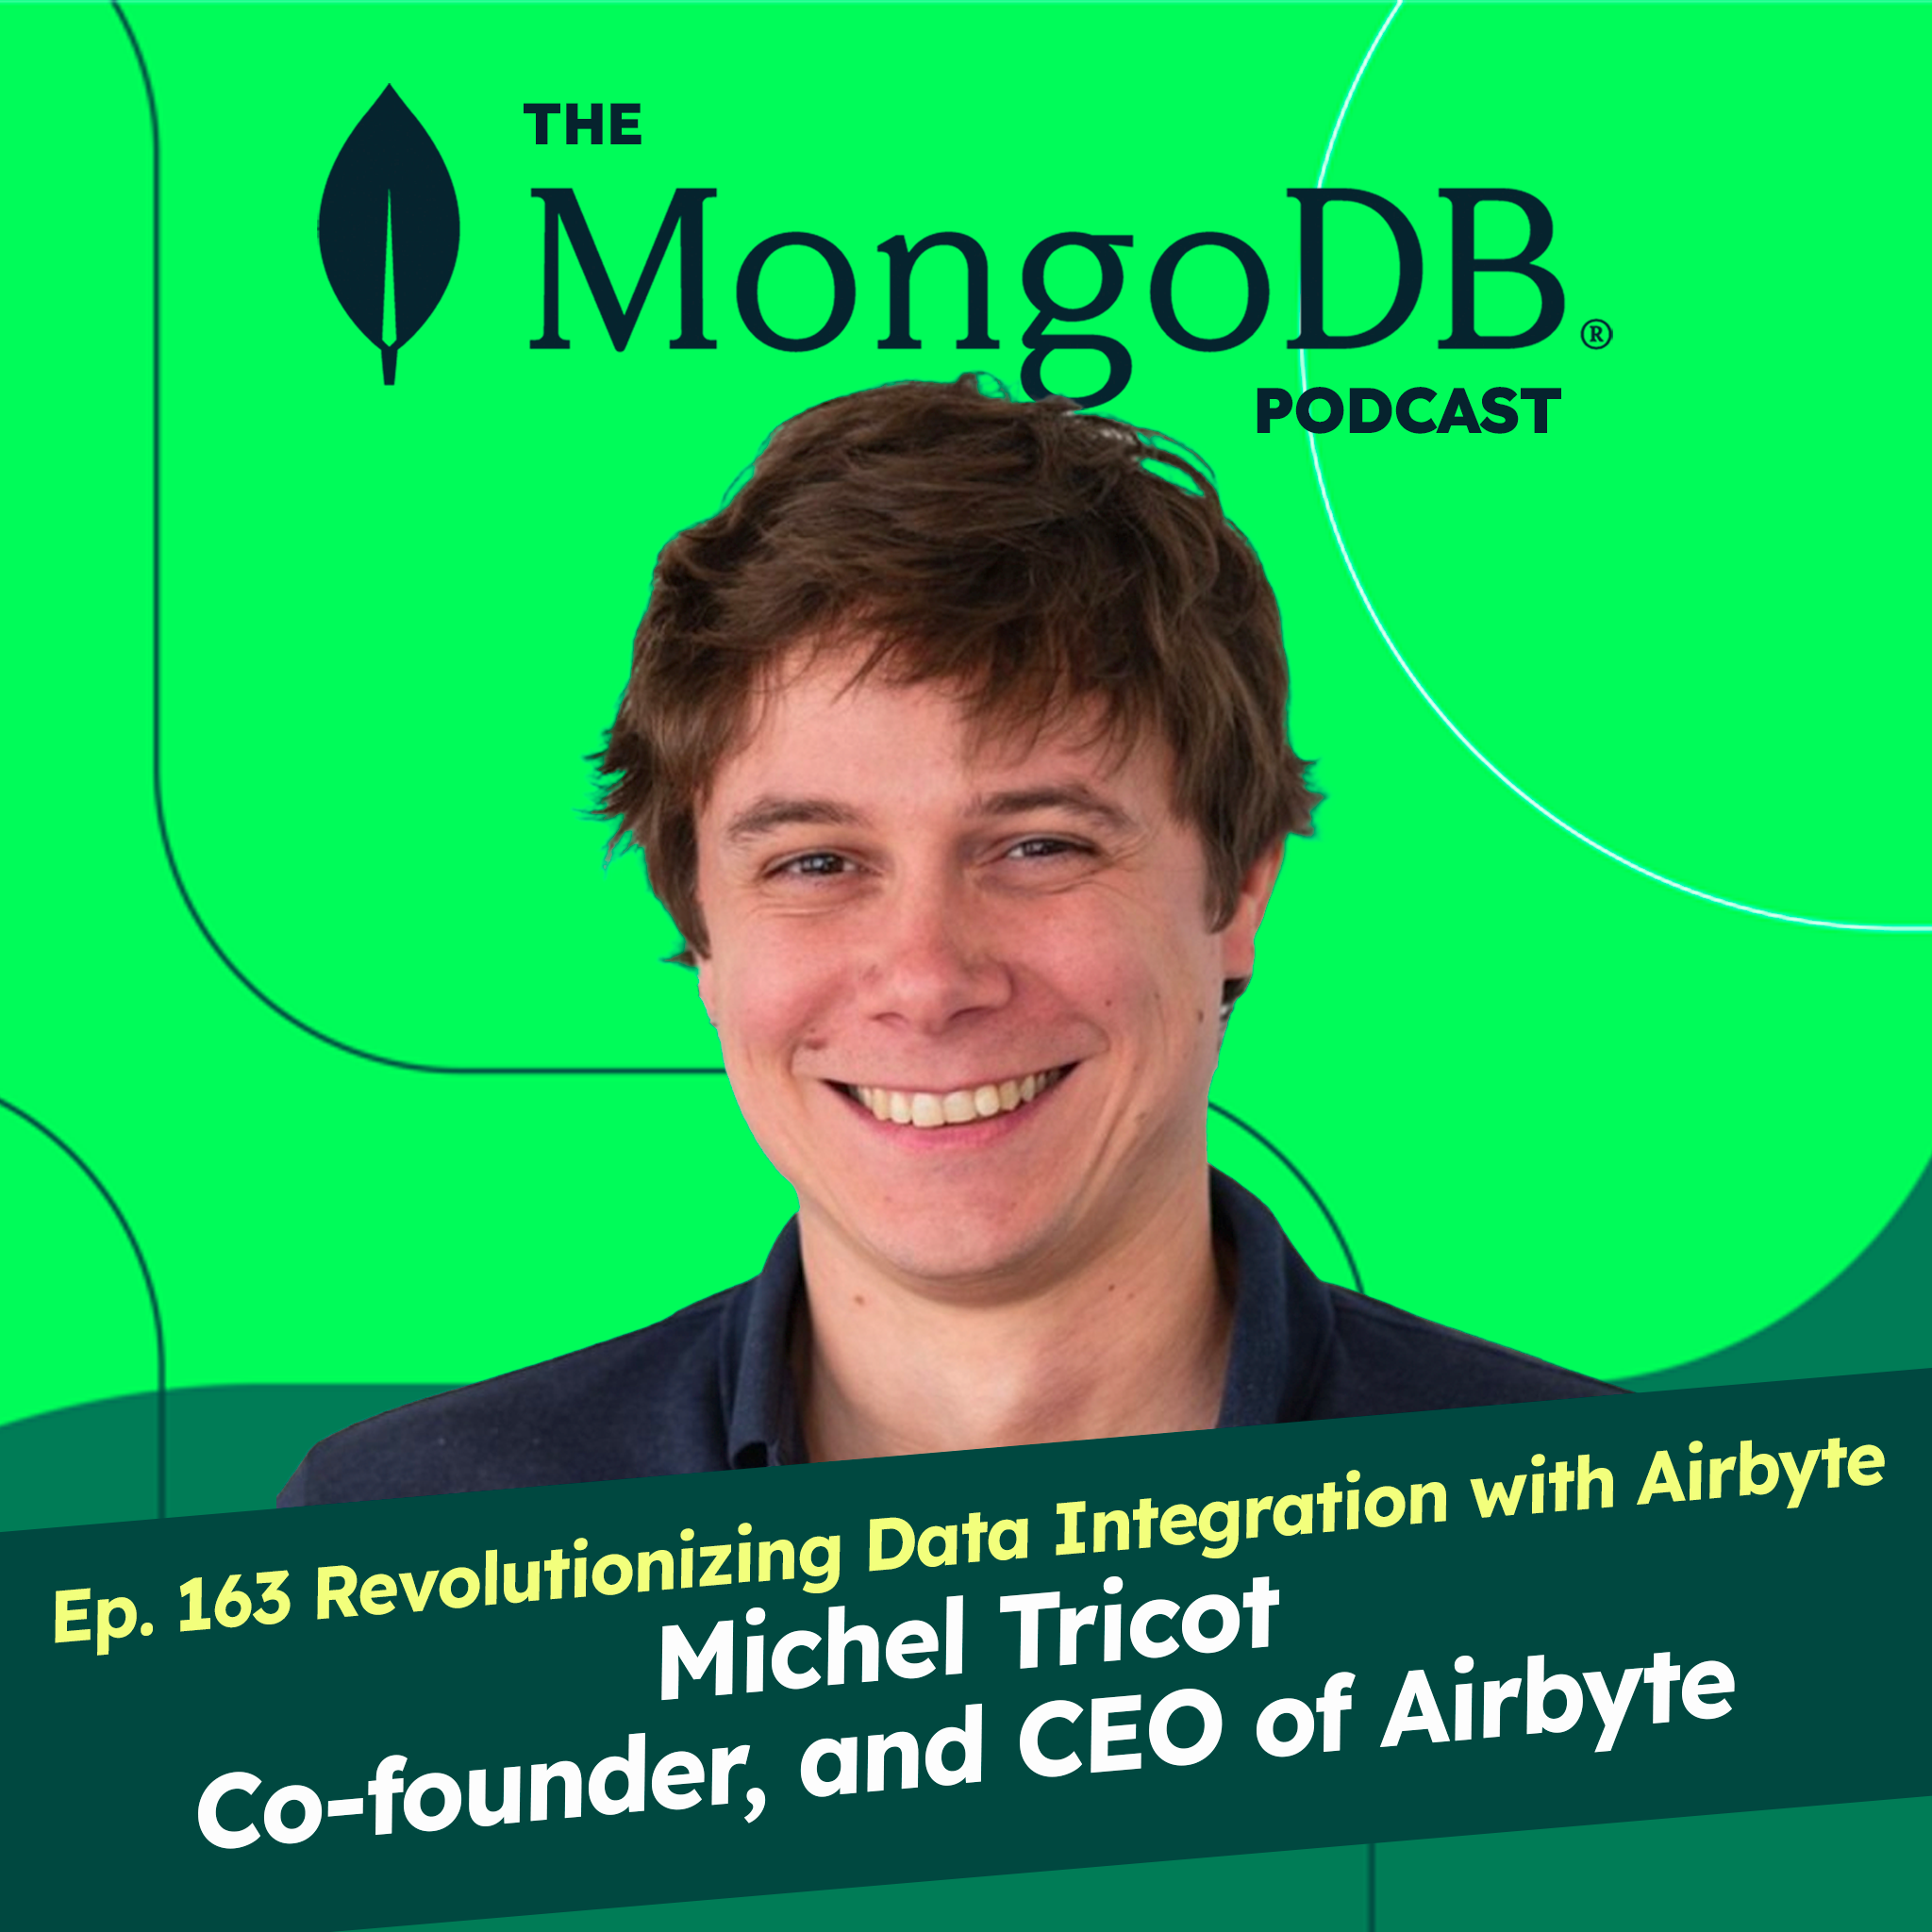 Ep. 163 Revolutionizing Data Integration with Airbyte: A Conversation with Co-founder Michel Tricot